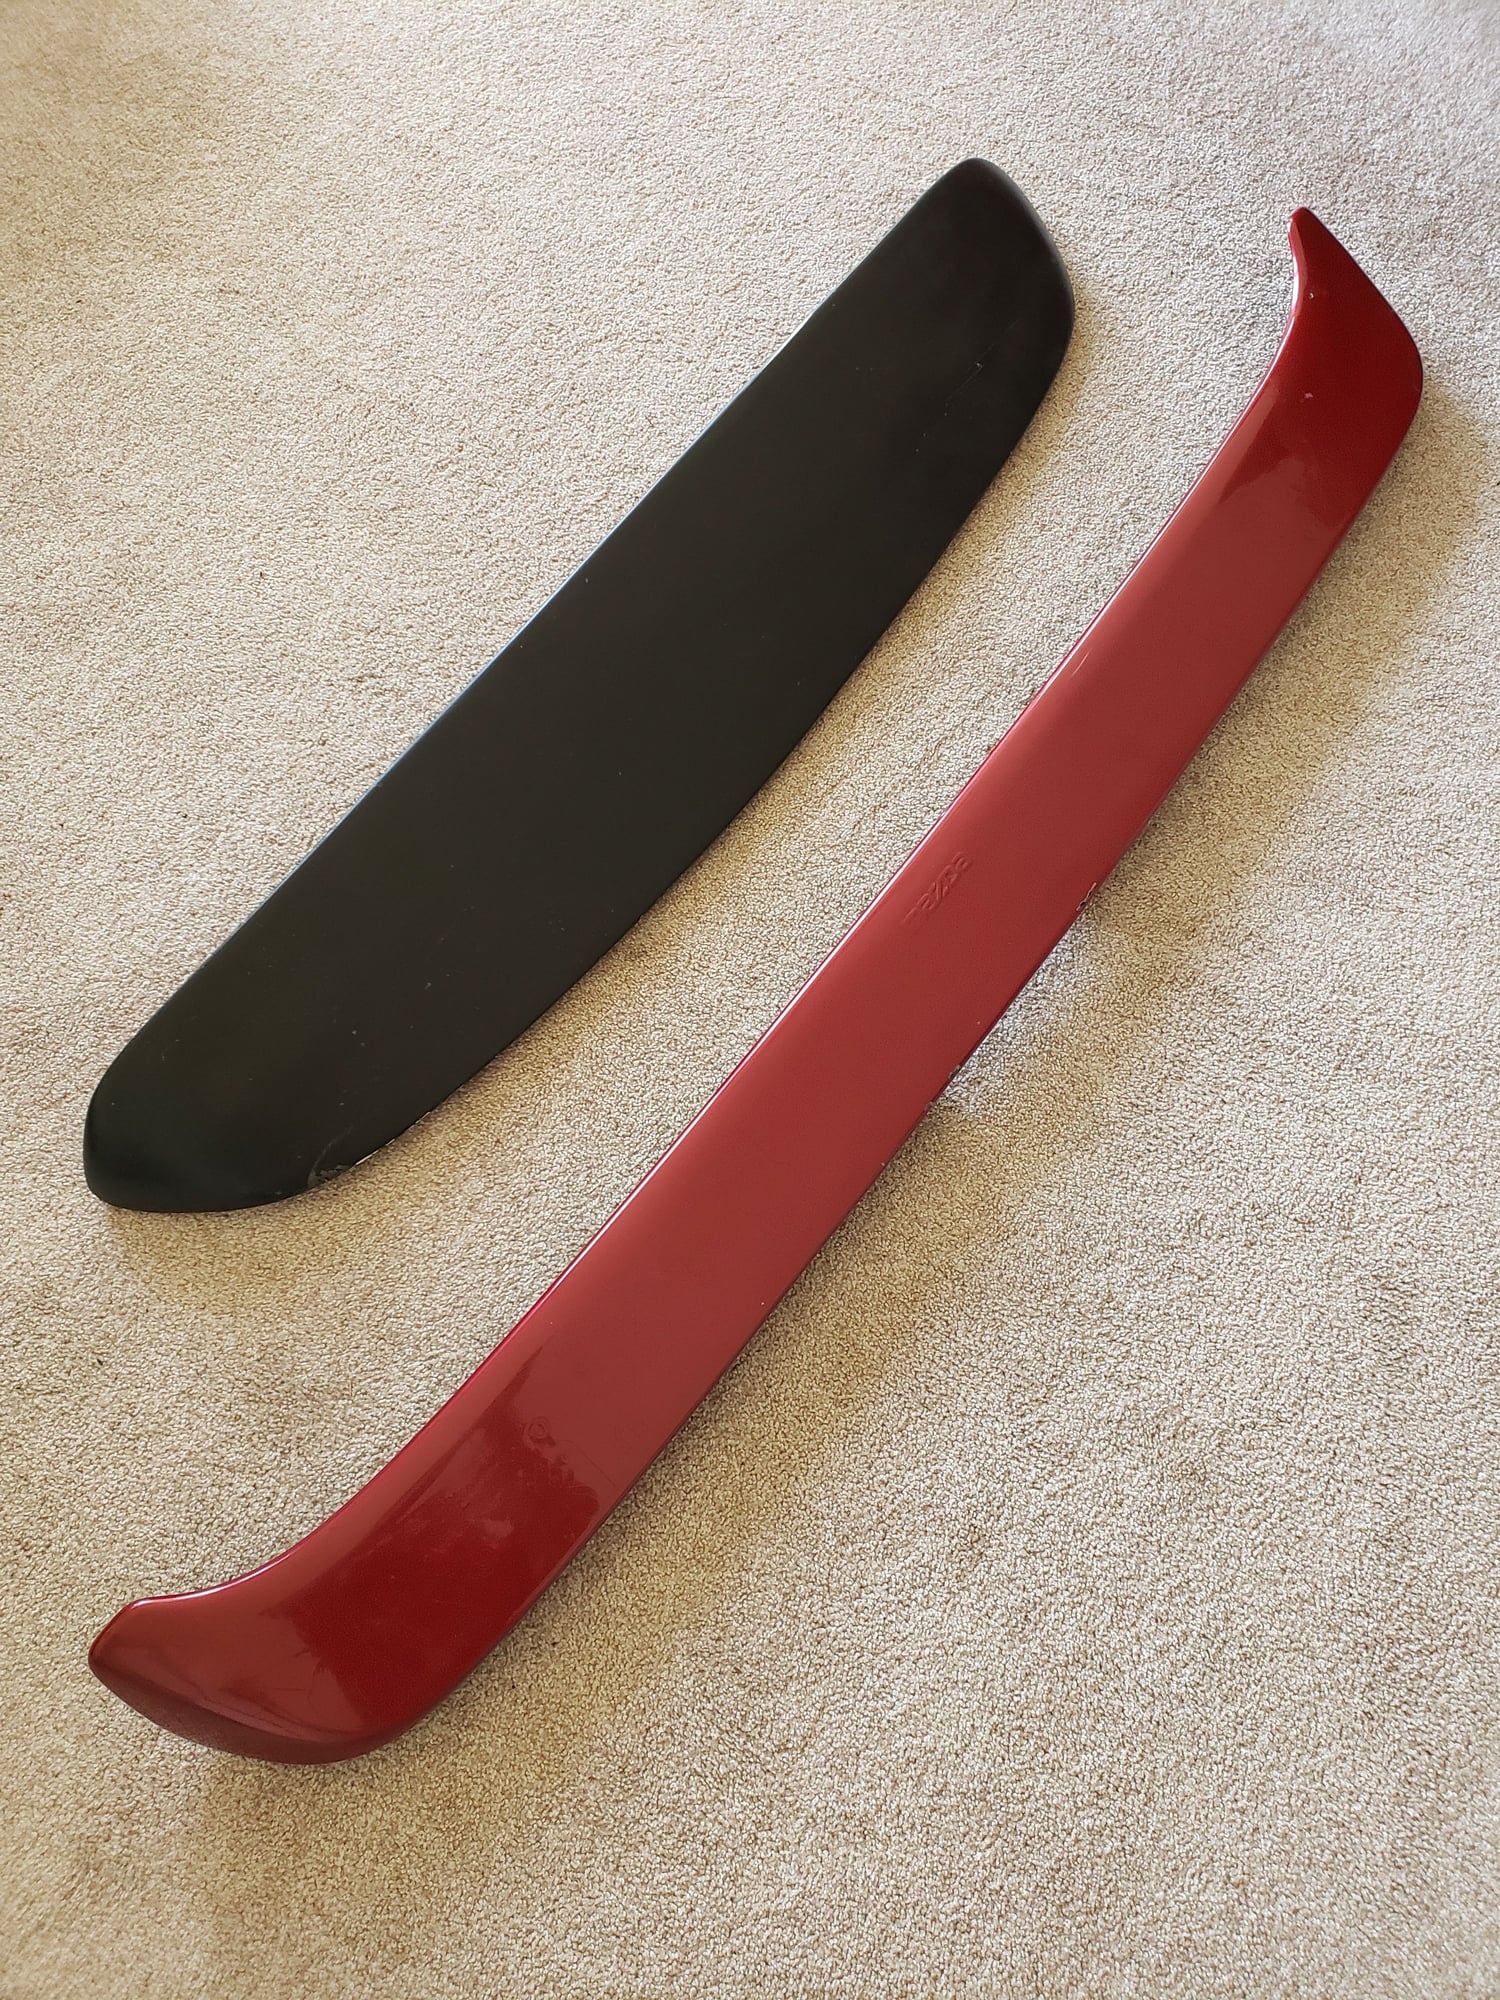 Exterior Body Parts - S4 Sport wing and AUTHENTIC Foresight roof wing - Used - 1986 to 1991 Mazda RX-7 - Asheville, NC 28803, United States